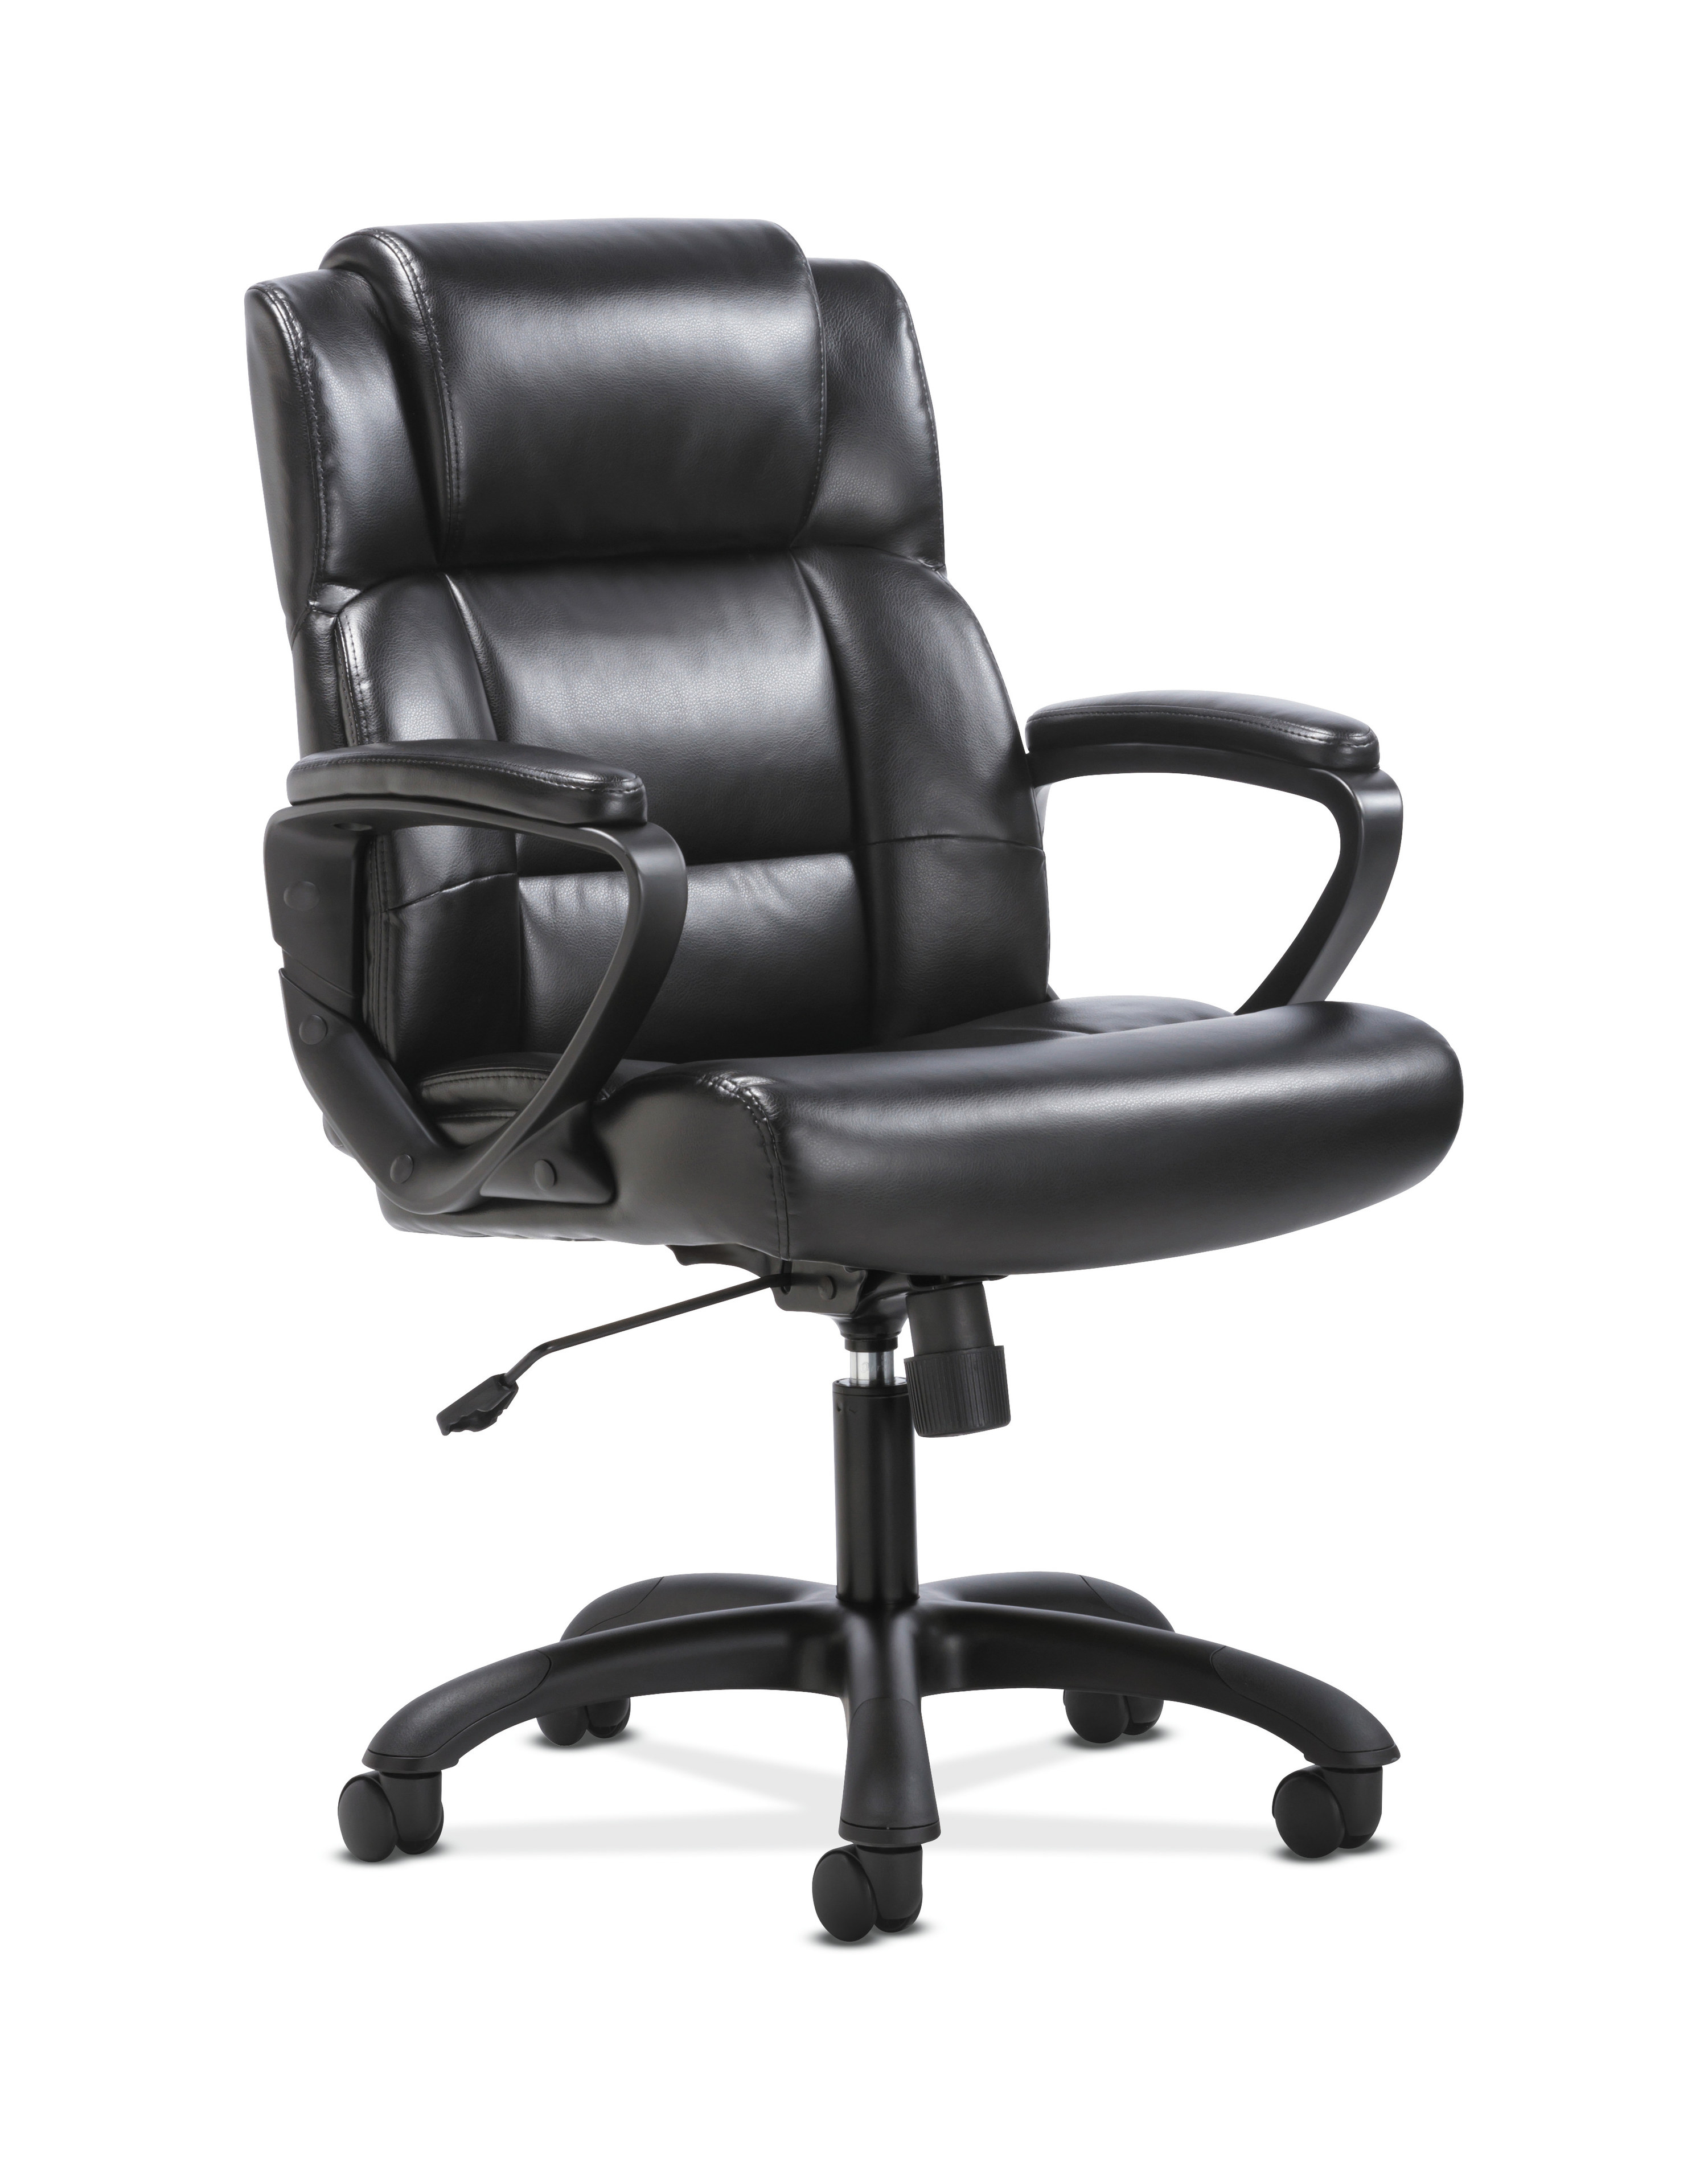 The black office chair